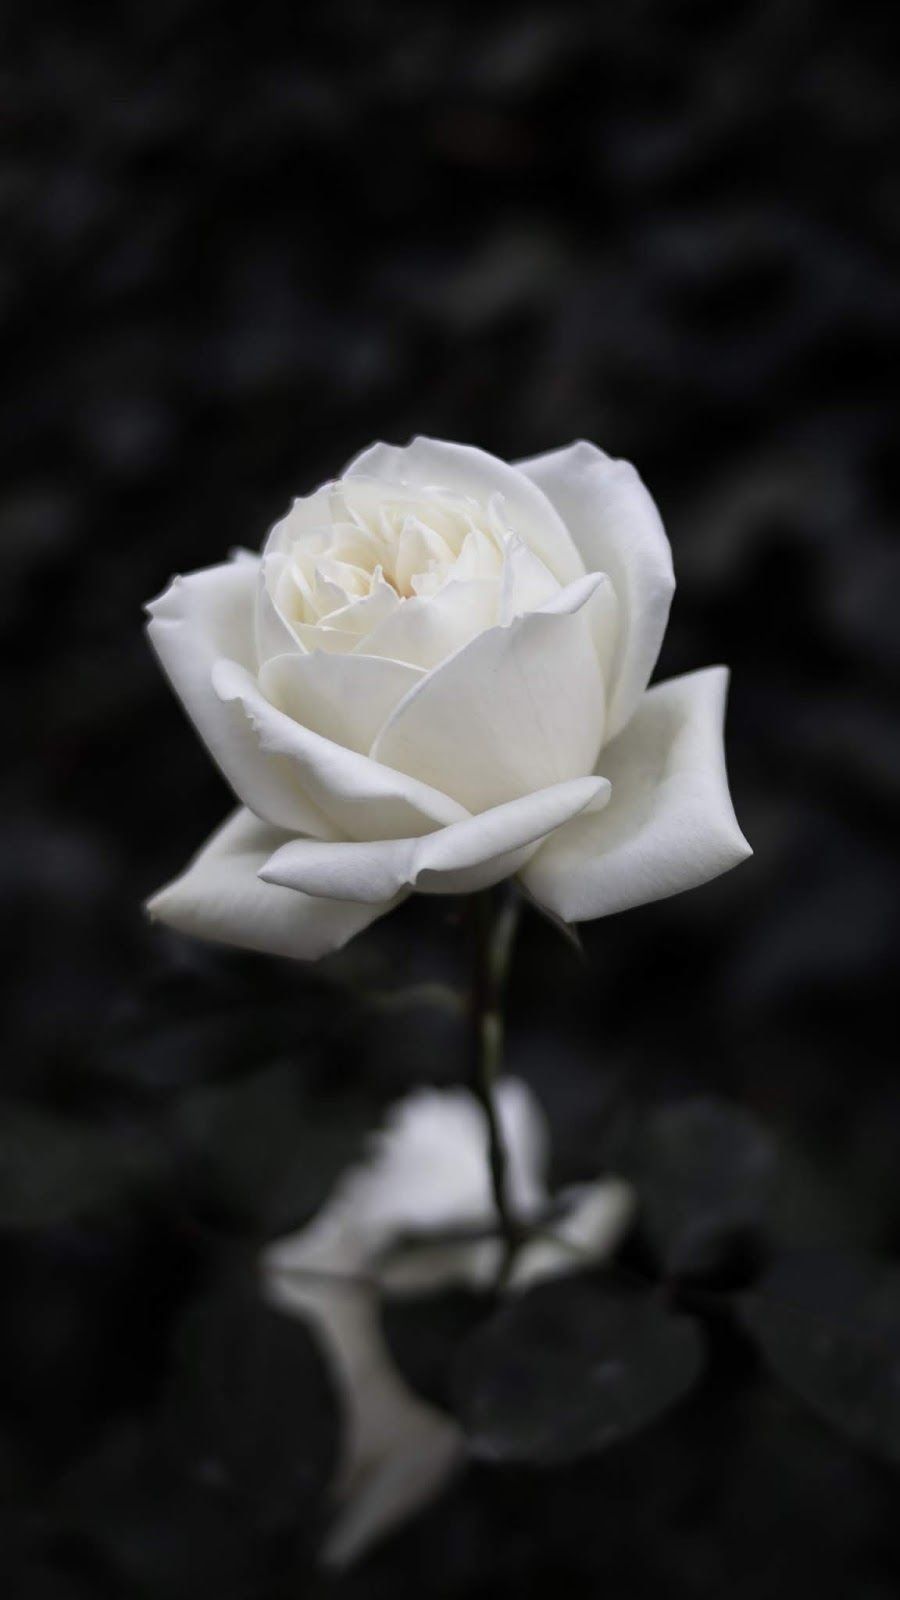 A white rose on a black background - Roses